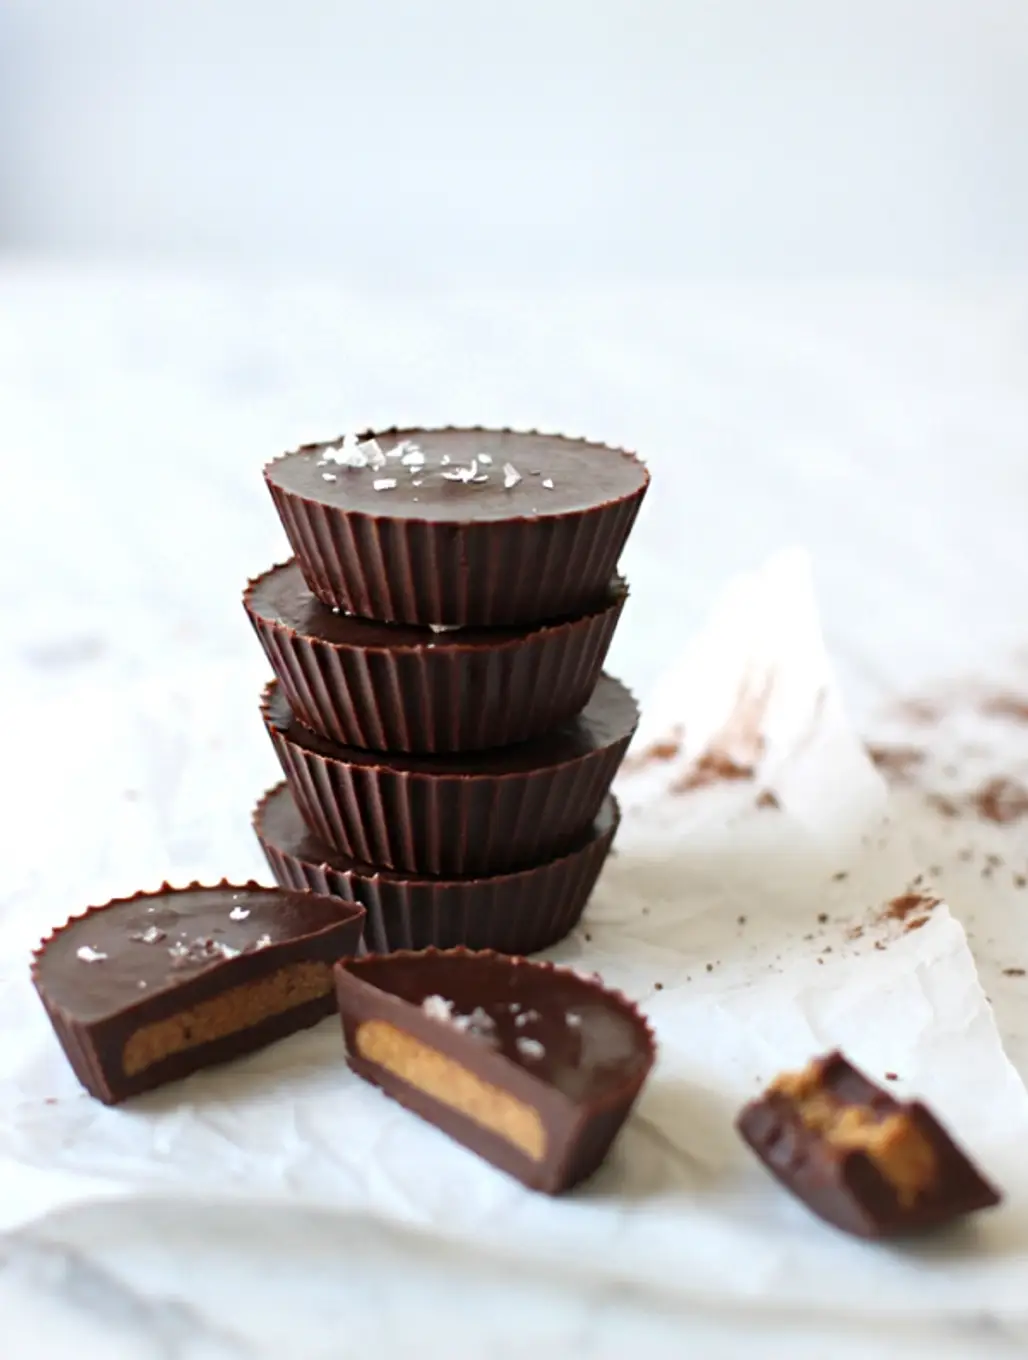 Almond or Peanut Butter Cups